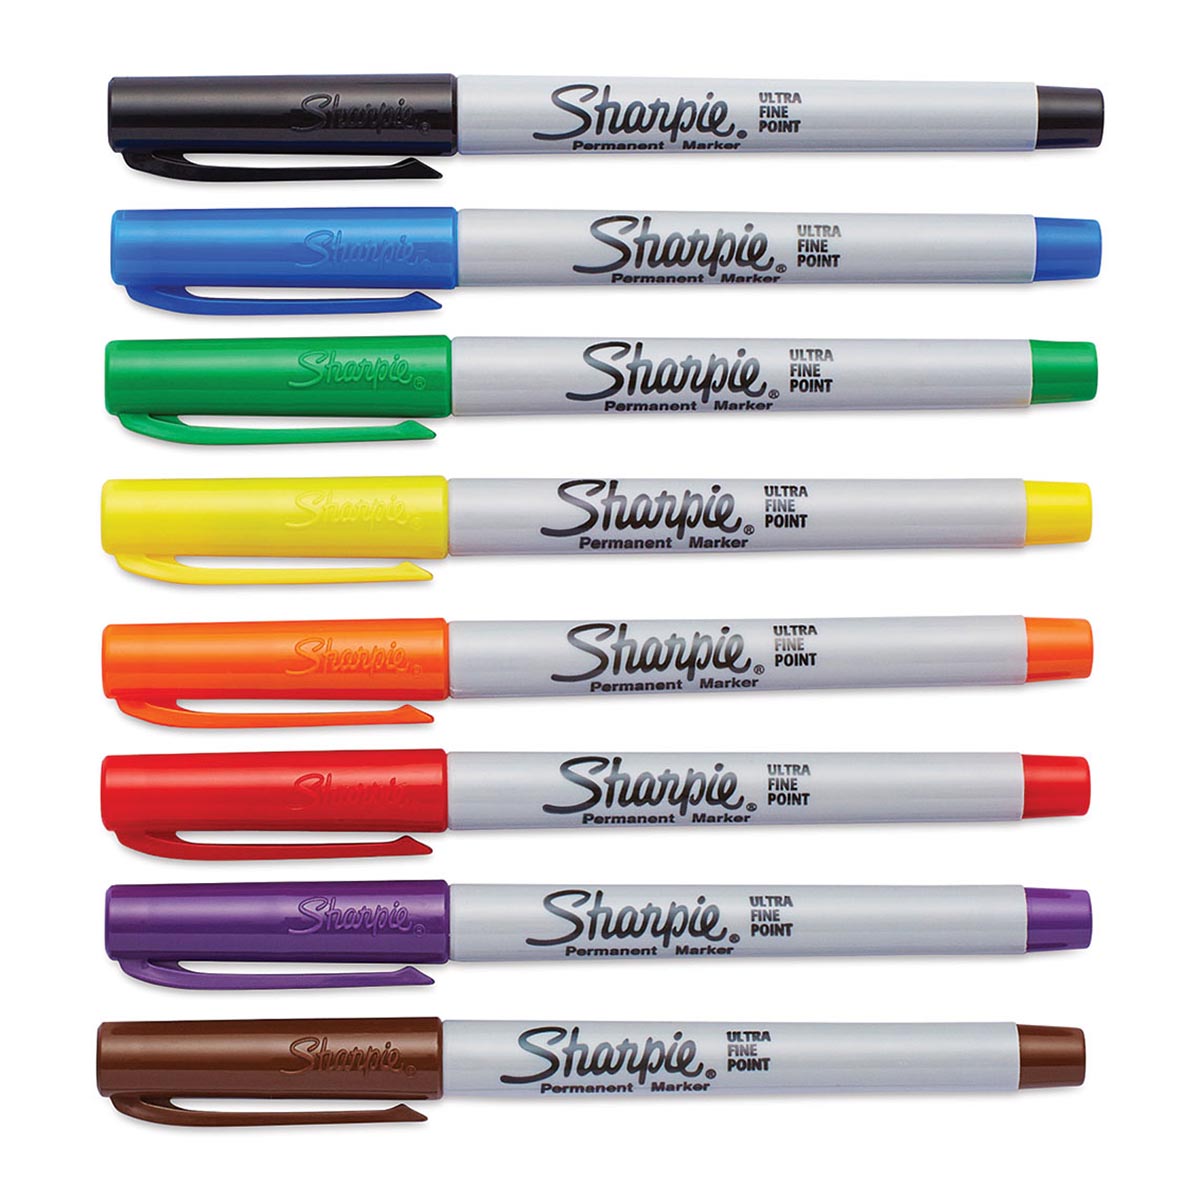 Sharpie Ultra-Fine Point Markers - Assorted Colors, Set of 5